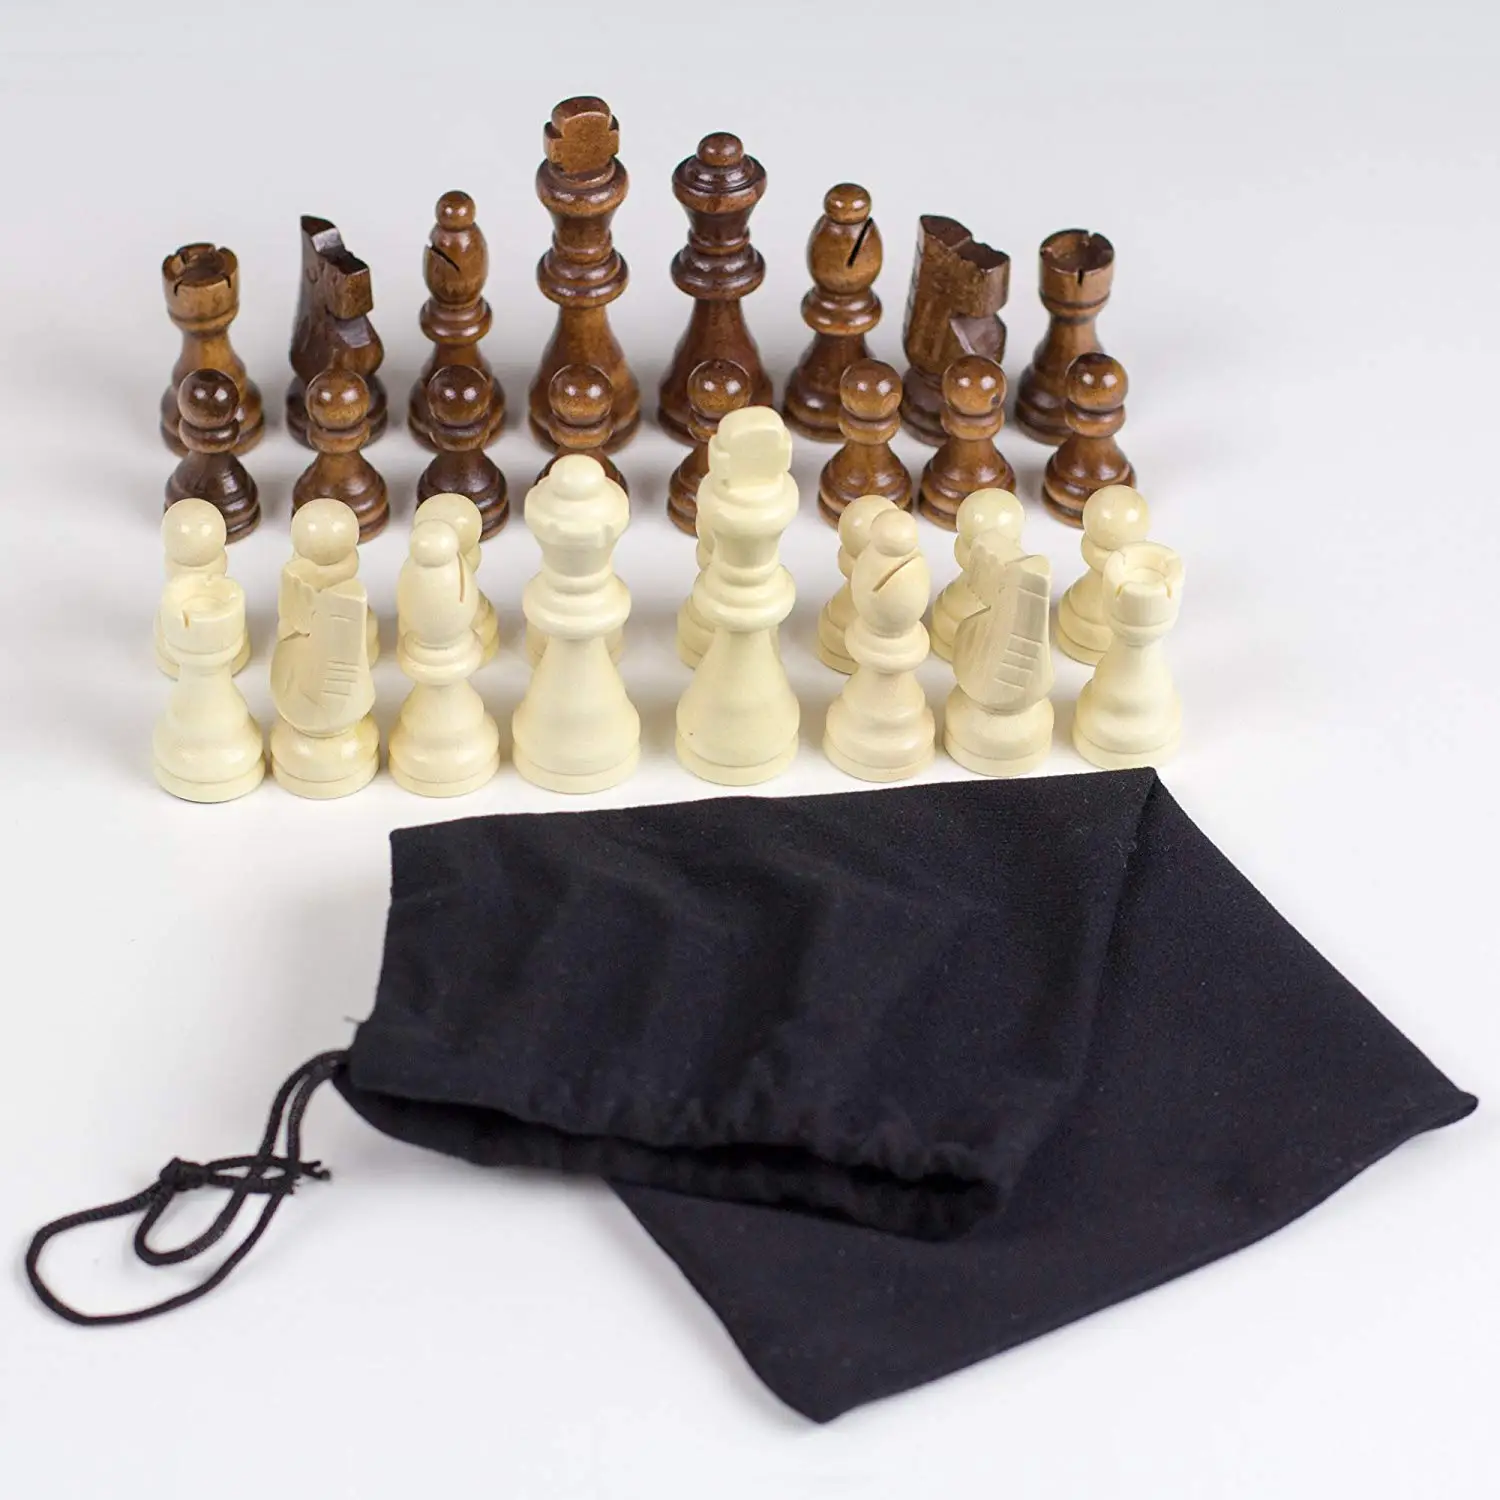 King 6 cm 6 cm King New Wooden Chess Set 32 Pieces Pieces Only 